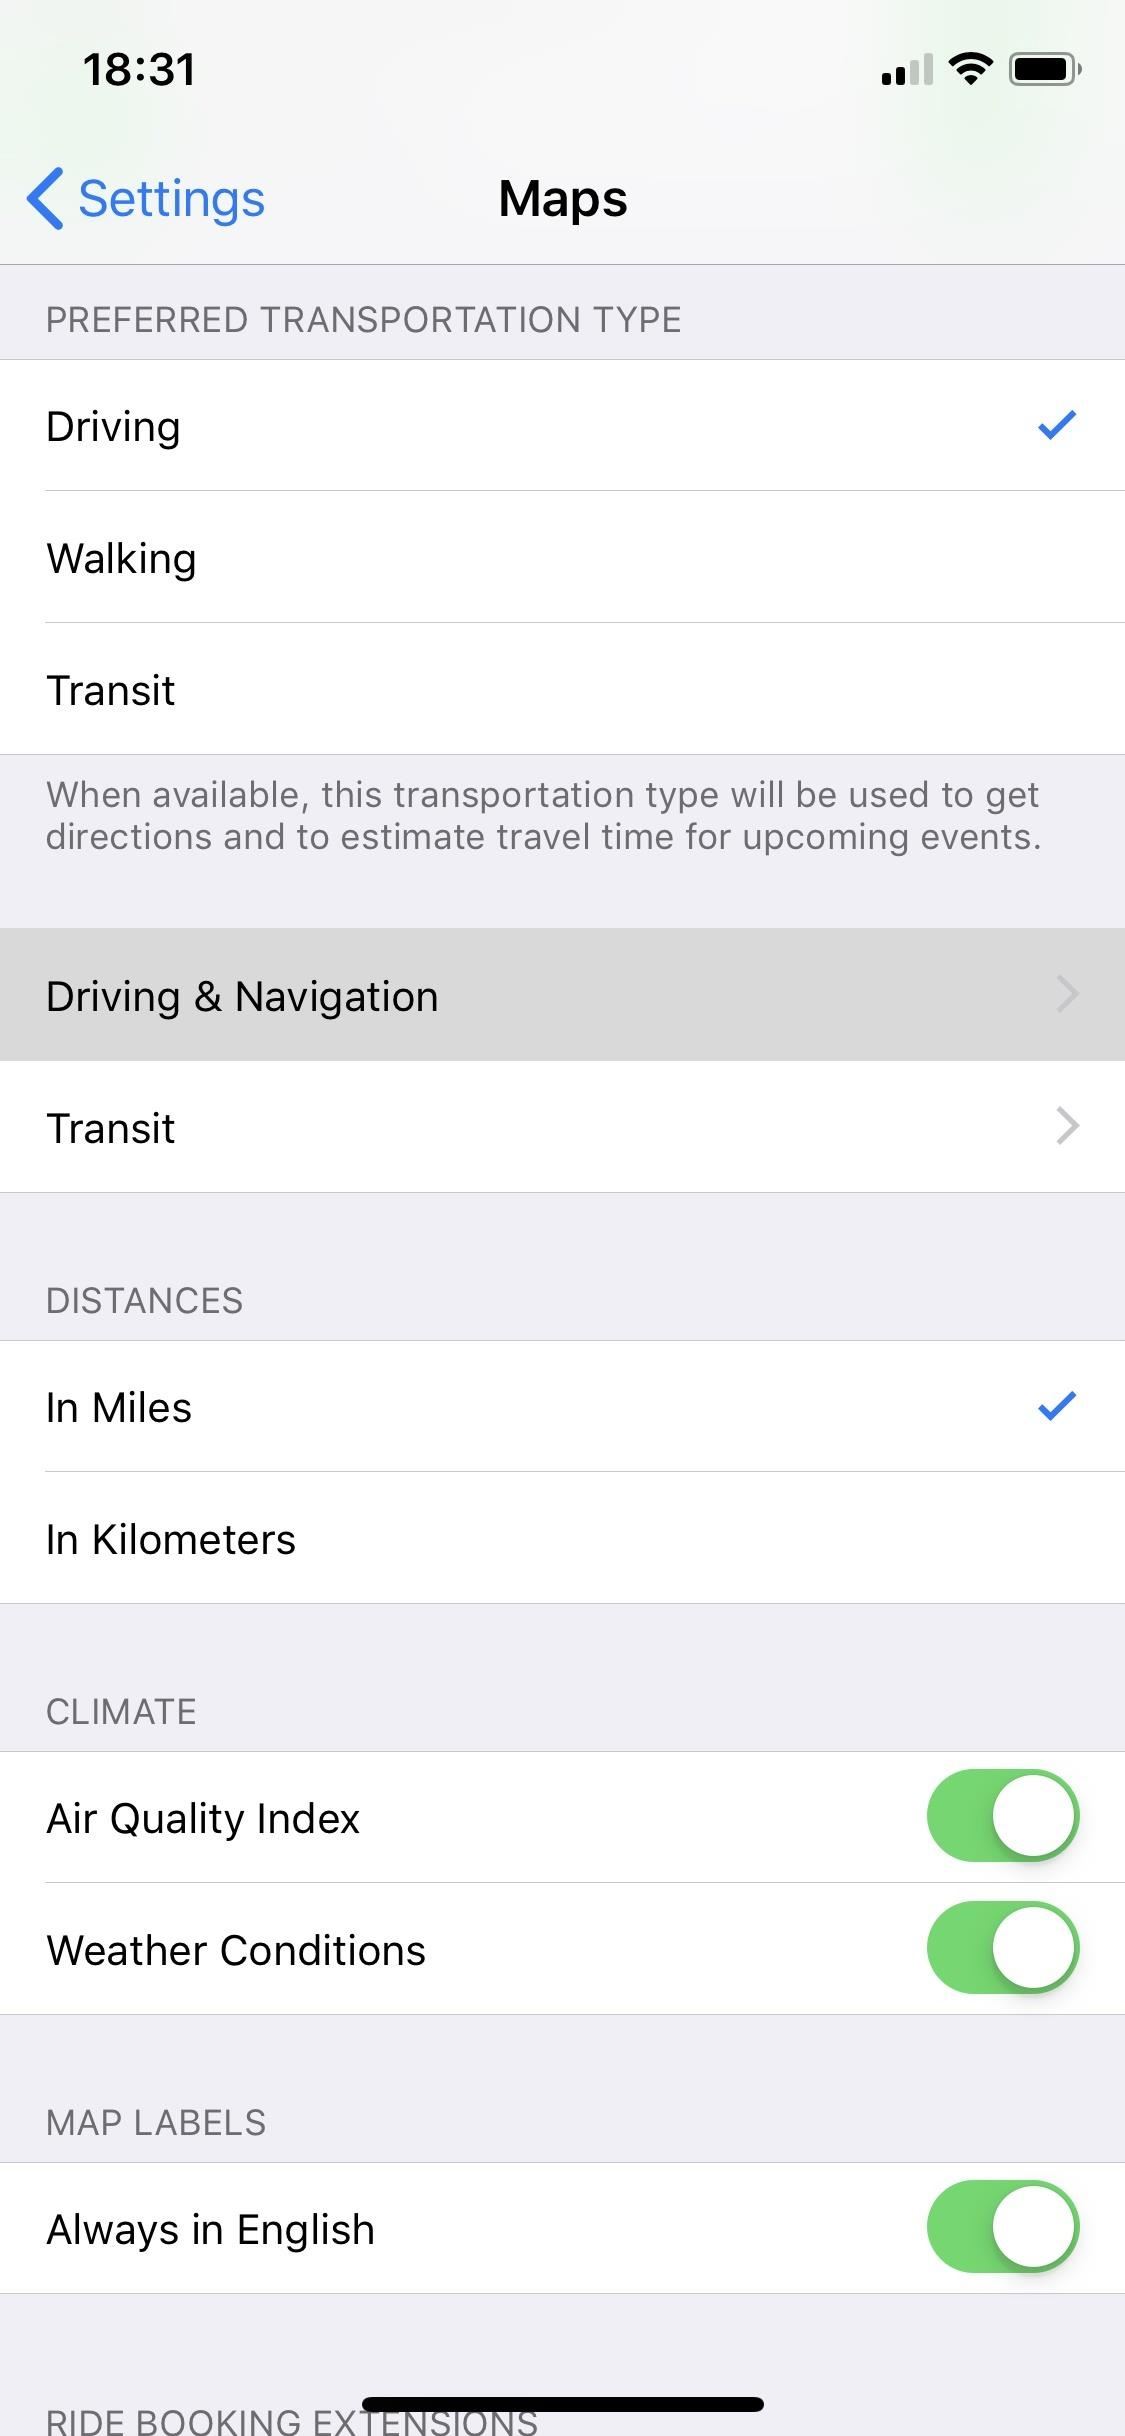 How to Customize Navigation Prompts on Apple Maps for Clearer Spoken Directions